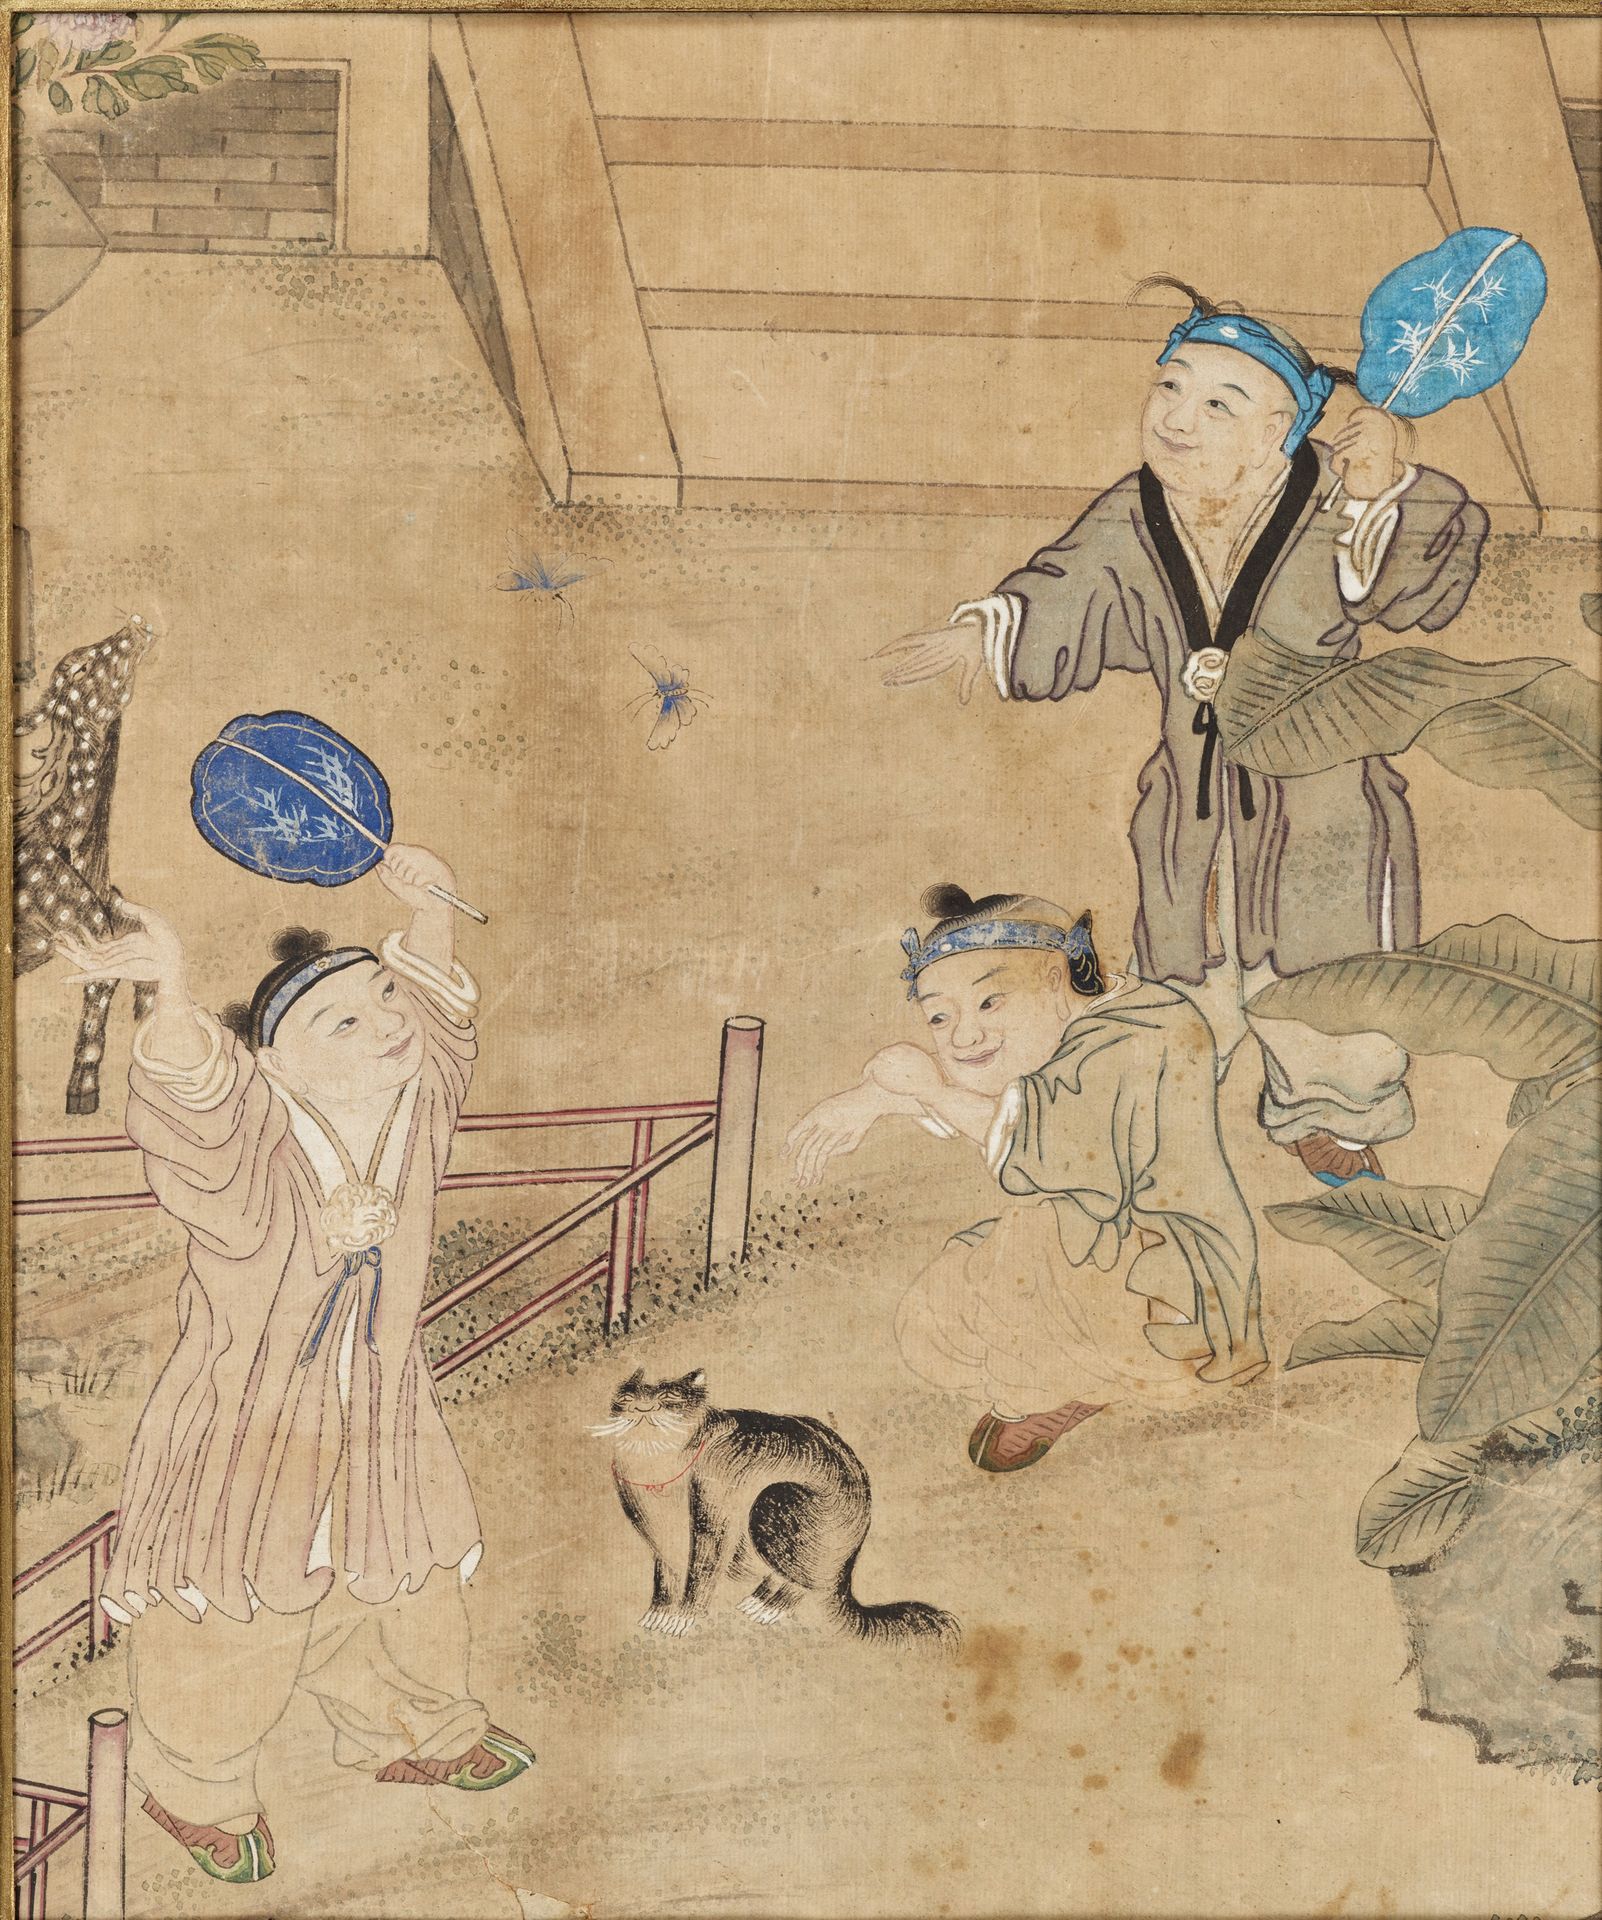 ‘BOYS AT PLAY AND CAT’, QING DYNASTY GARÇONS AU JEU ET CHAT, DYNASTIE QING
Chine&hellip;